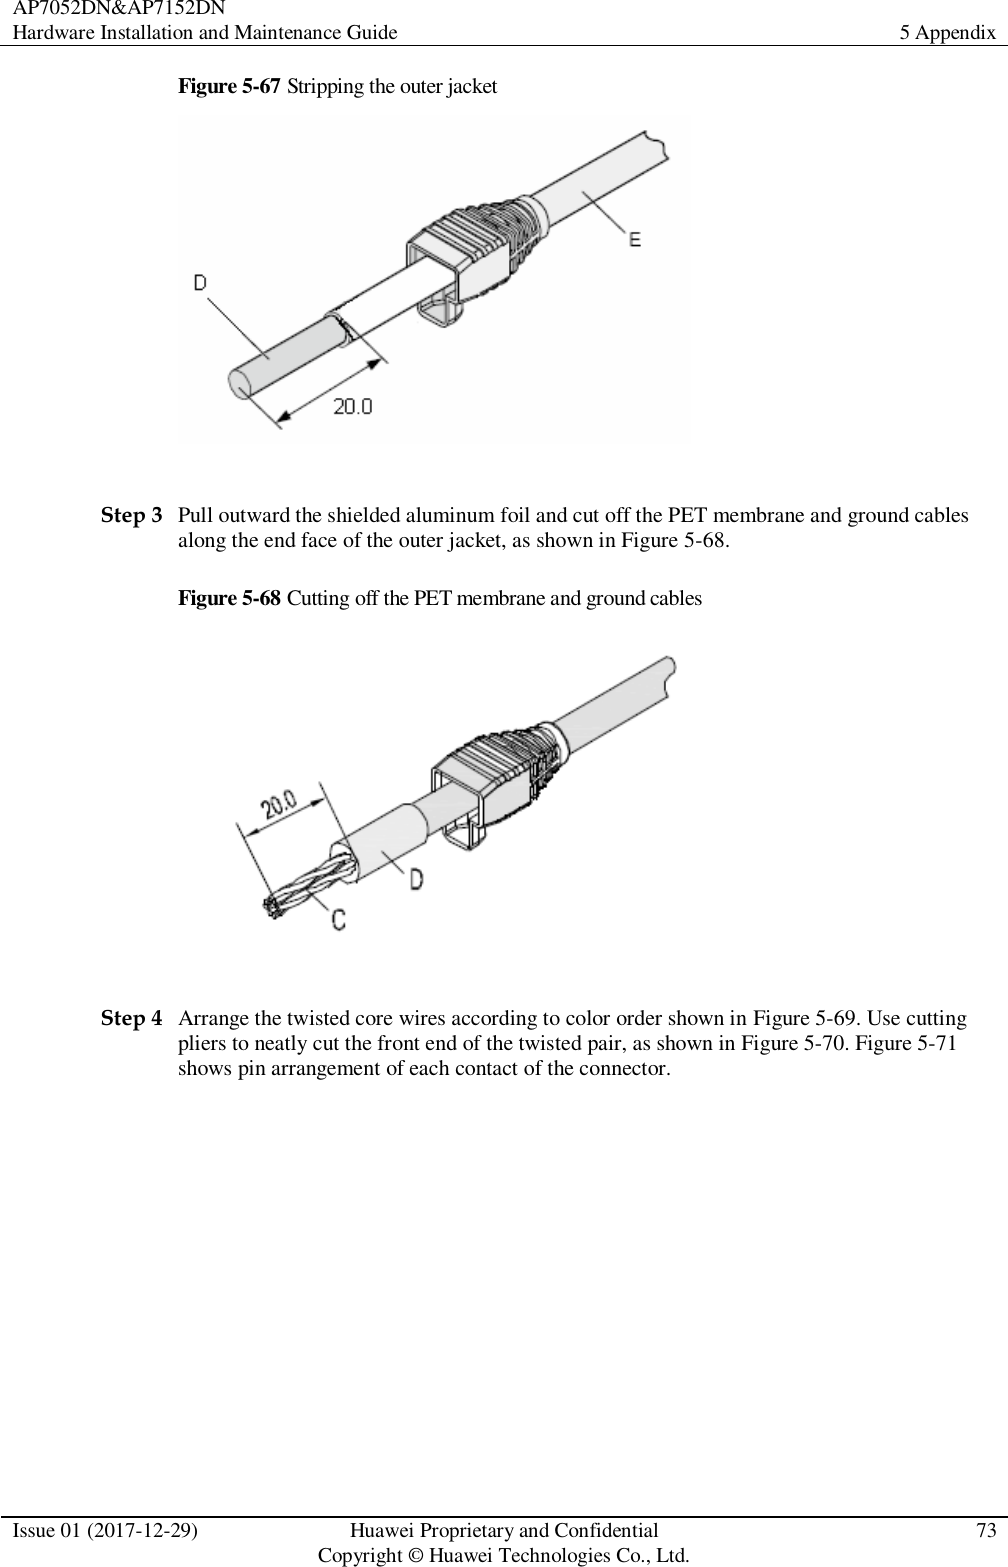 AP7052DN&amp;AP7152DN Hardware Installation and Maintenance Guide 5 Appendix  Issue 01 (2017-12-29) Huawei Proprietary and Confidential                                     Copyright © Huawei Technologies Co., Ltd. 73  Figure 5-67 Stripping the outer jacket   Step 3 Pull outward the shielded aluminum foil and cut off the PET membrane and ground cables along the end face of the outer jacket, as shown in Figure 5-68. Figure 5-68 Cutting off the PET membrane and ground cables   Step 4 Arrange the twisted core wires according to color order shown in Figure 5-69. Use cutting pliers to neatly cut the front end of the twisted pair, as shown in Figure 5-70. Figure 5-71 shows pin arrangement of each contact of the connector.   